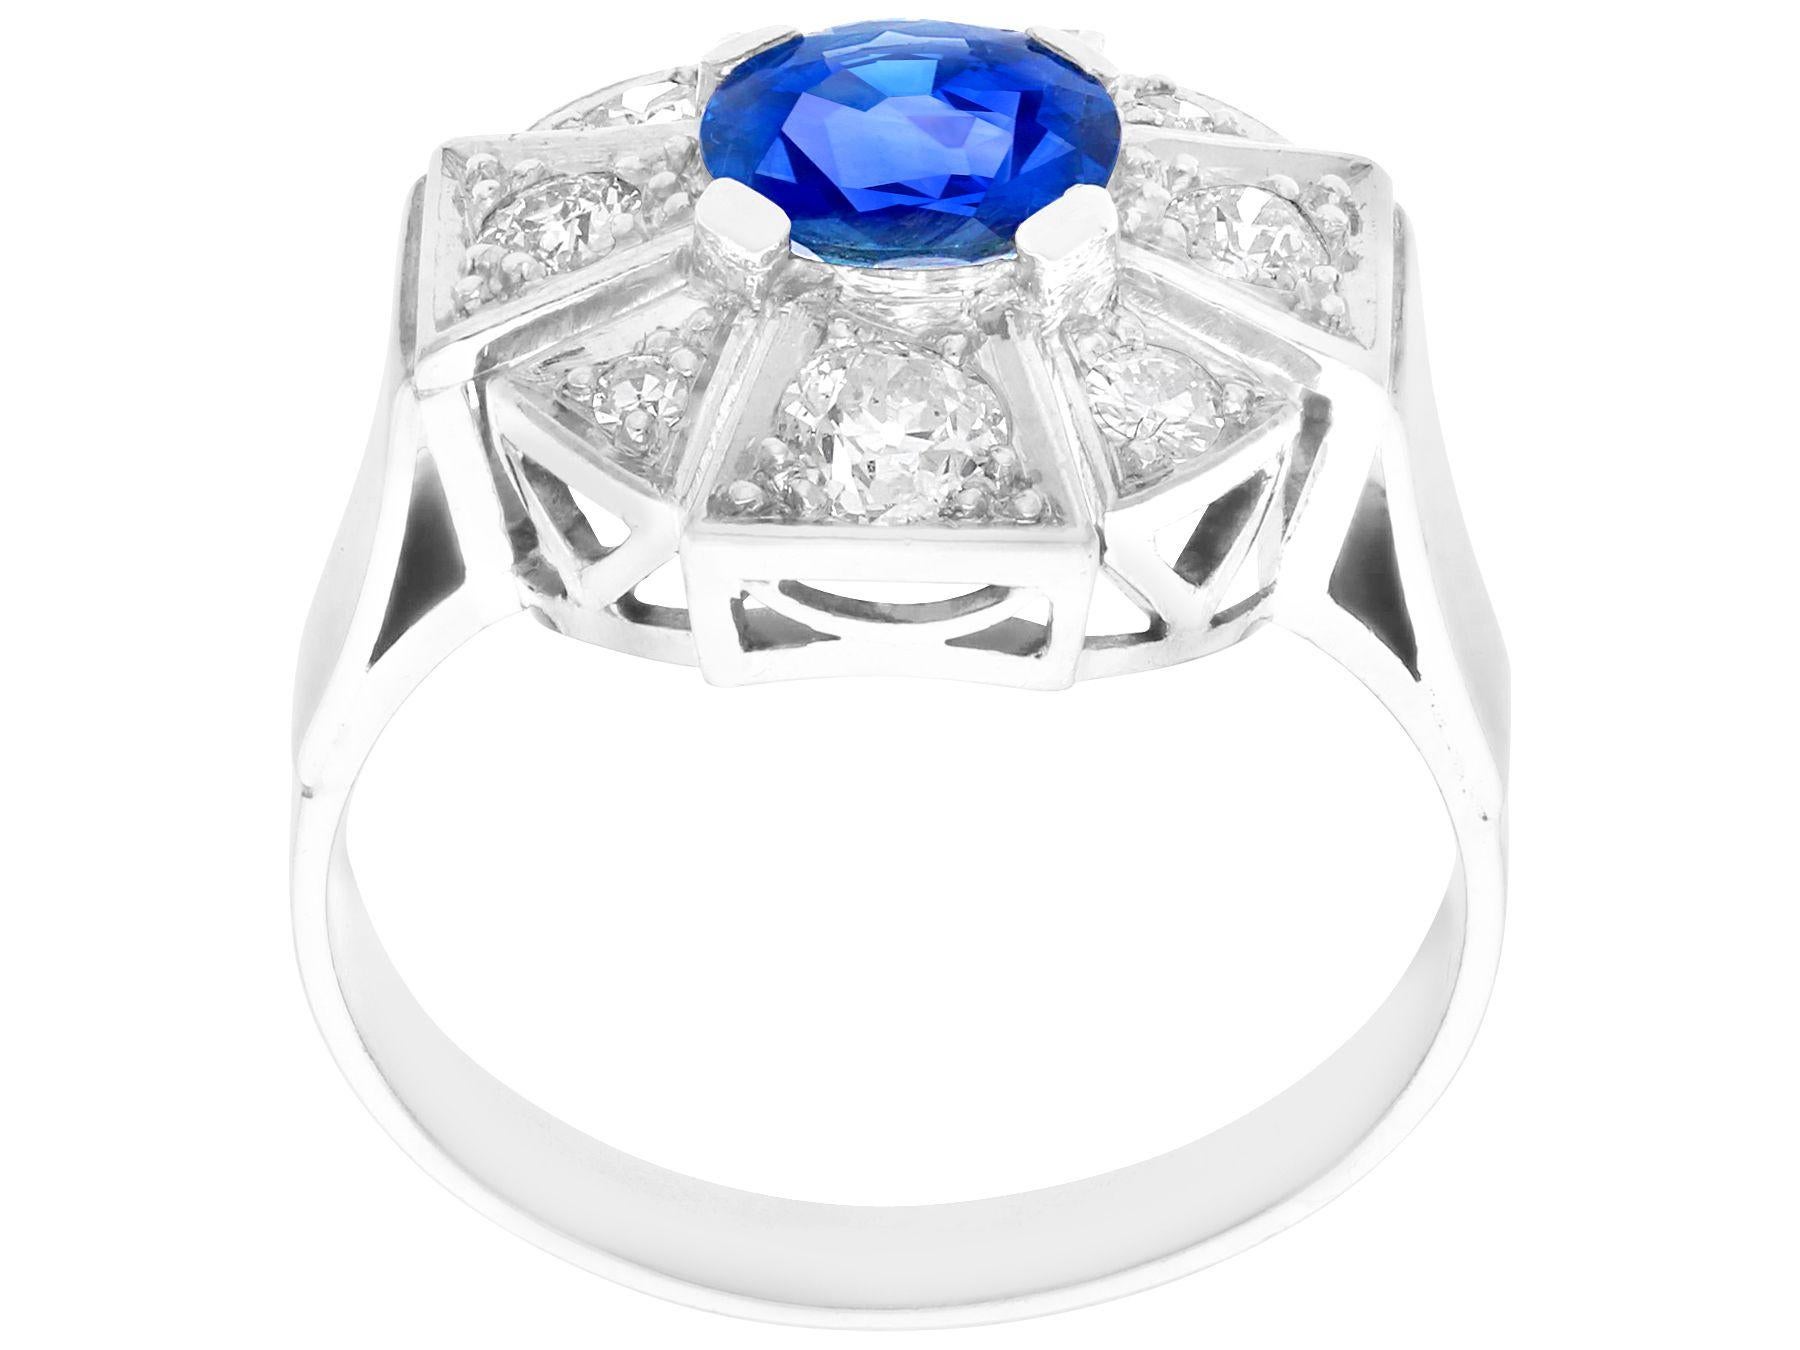 1.69 Carat Burmese Sapphire and 1.15 Carat Diamond White Gold Cocktail Ring For Sale 1